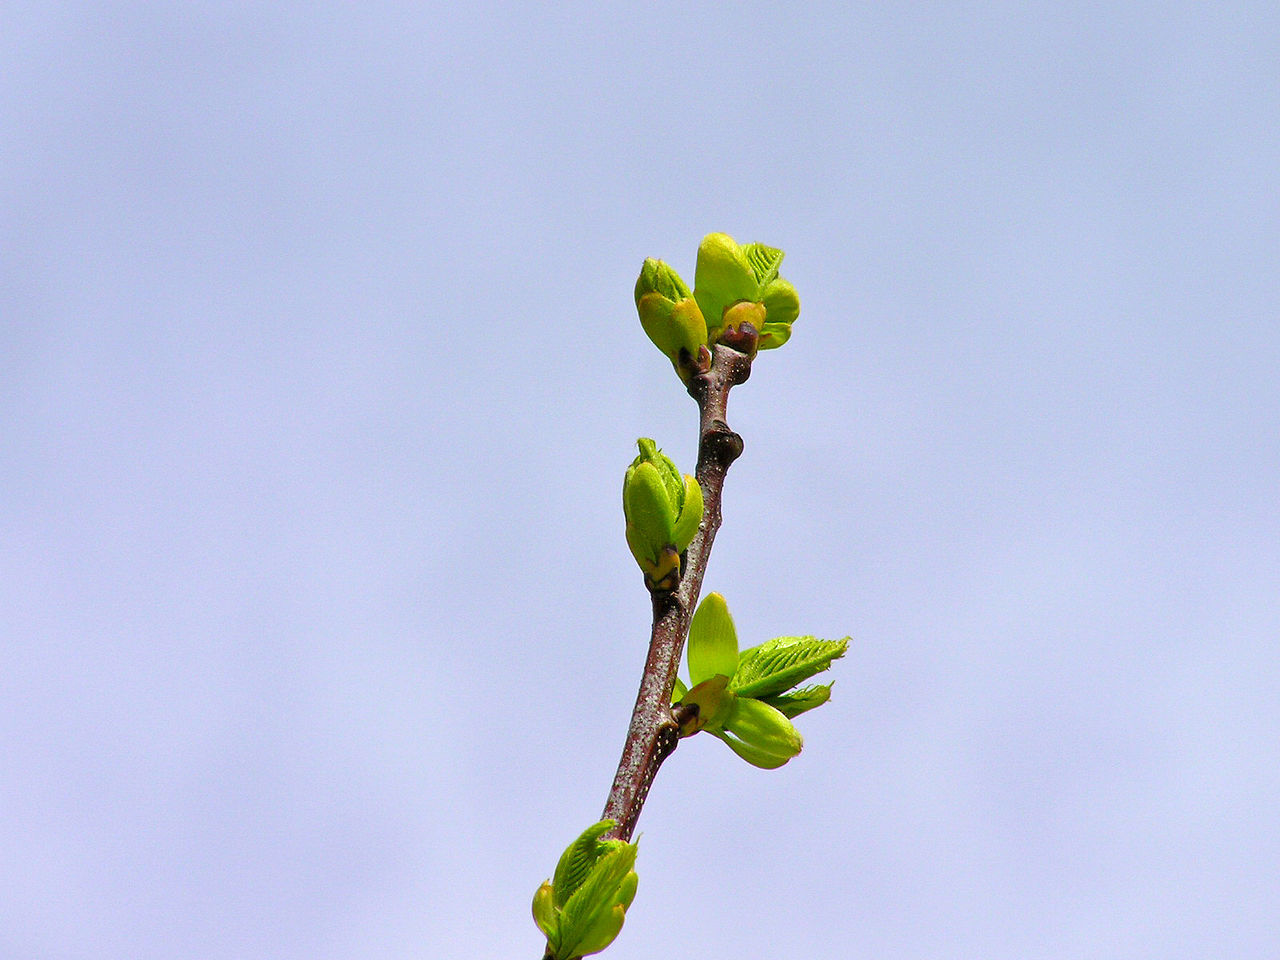 CLOSE-UP OF GREEN PLANT AGAINST SKY